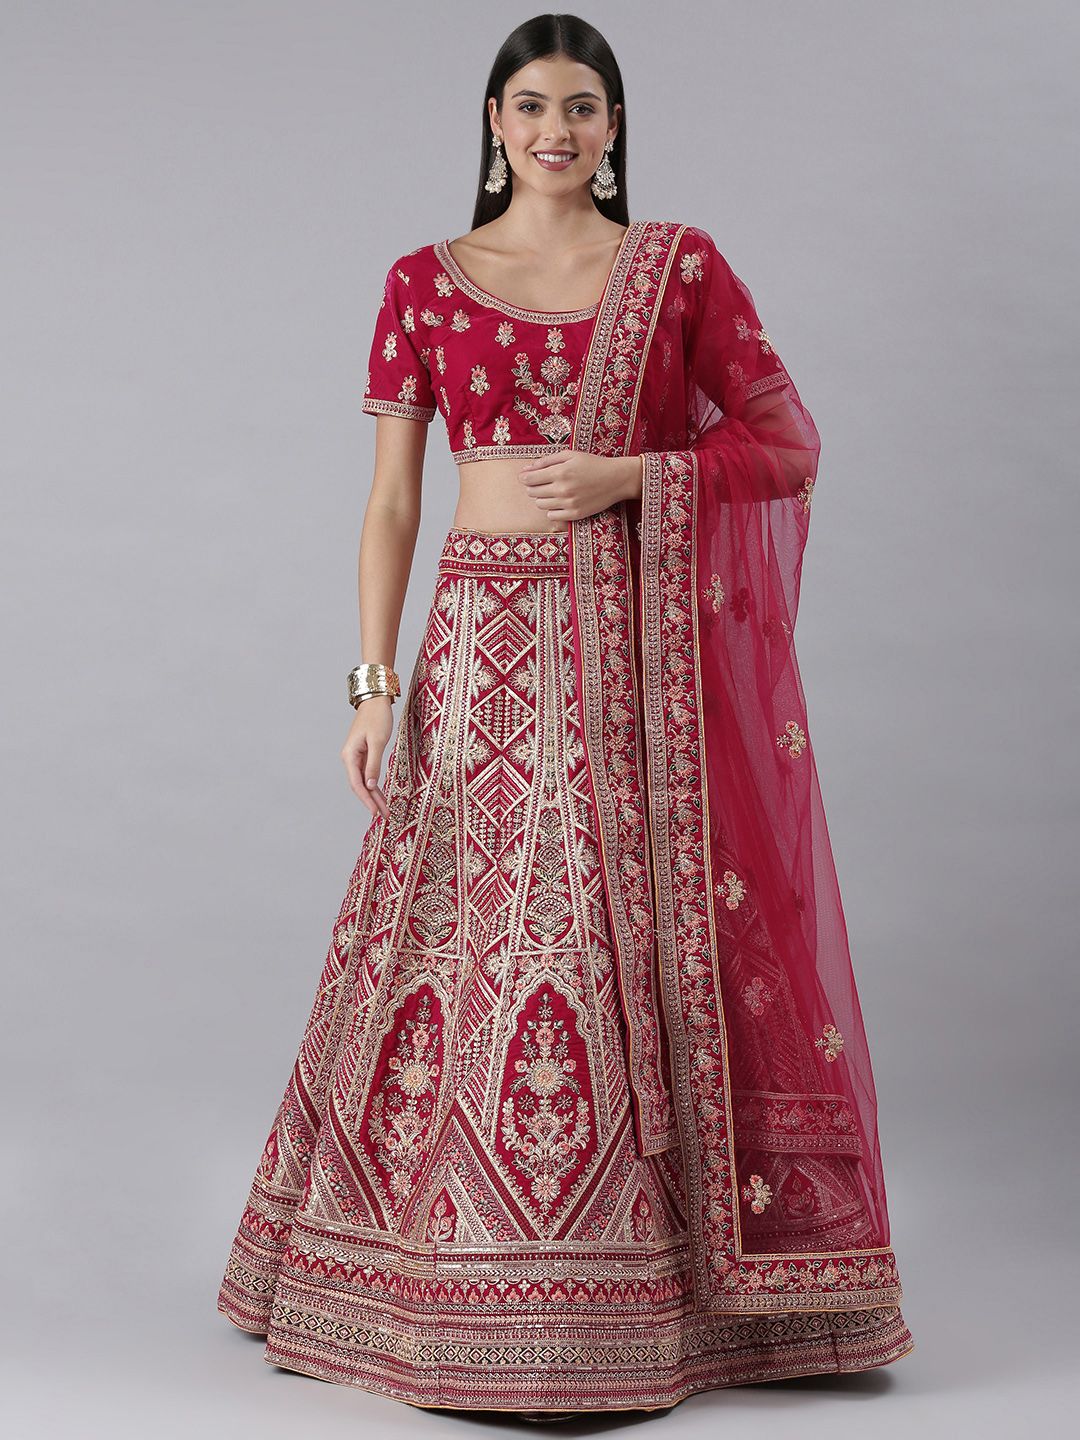 flaher Embroidered Beads & Stones Semi-Stitched Lehenga & Blouse With Dupatta Price in India